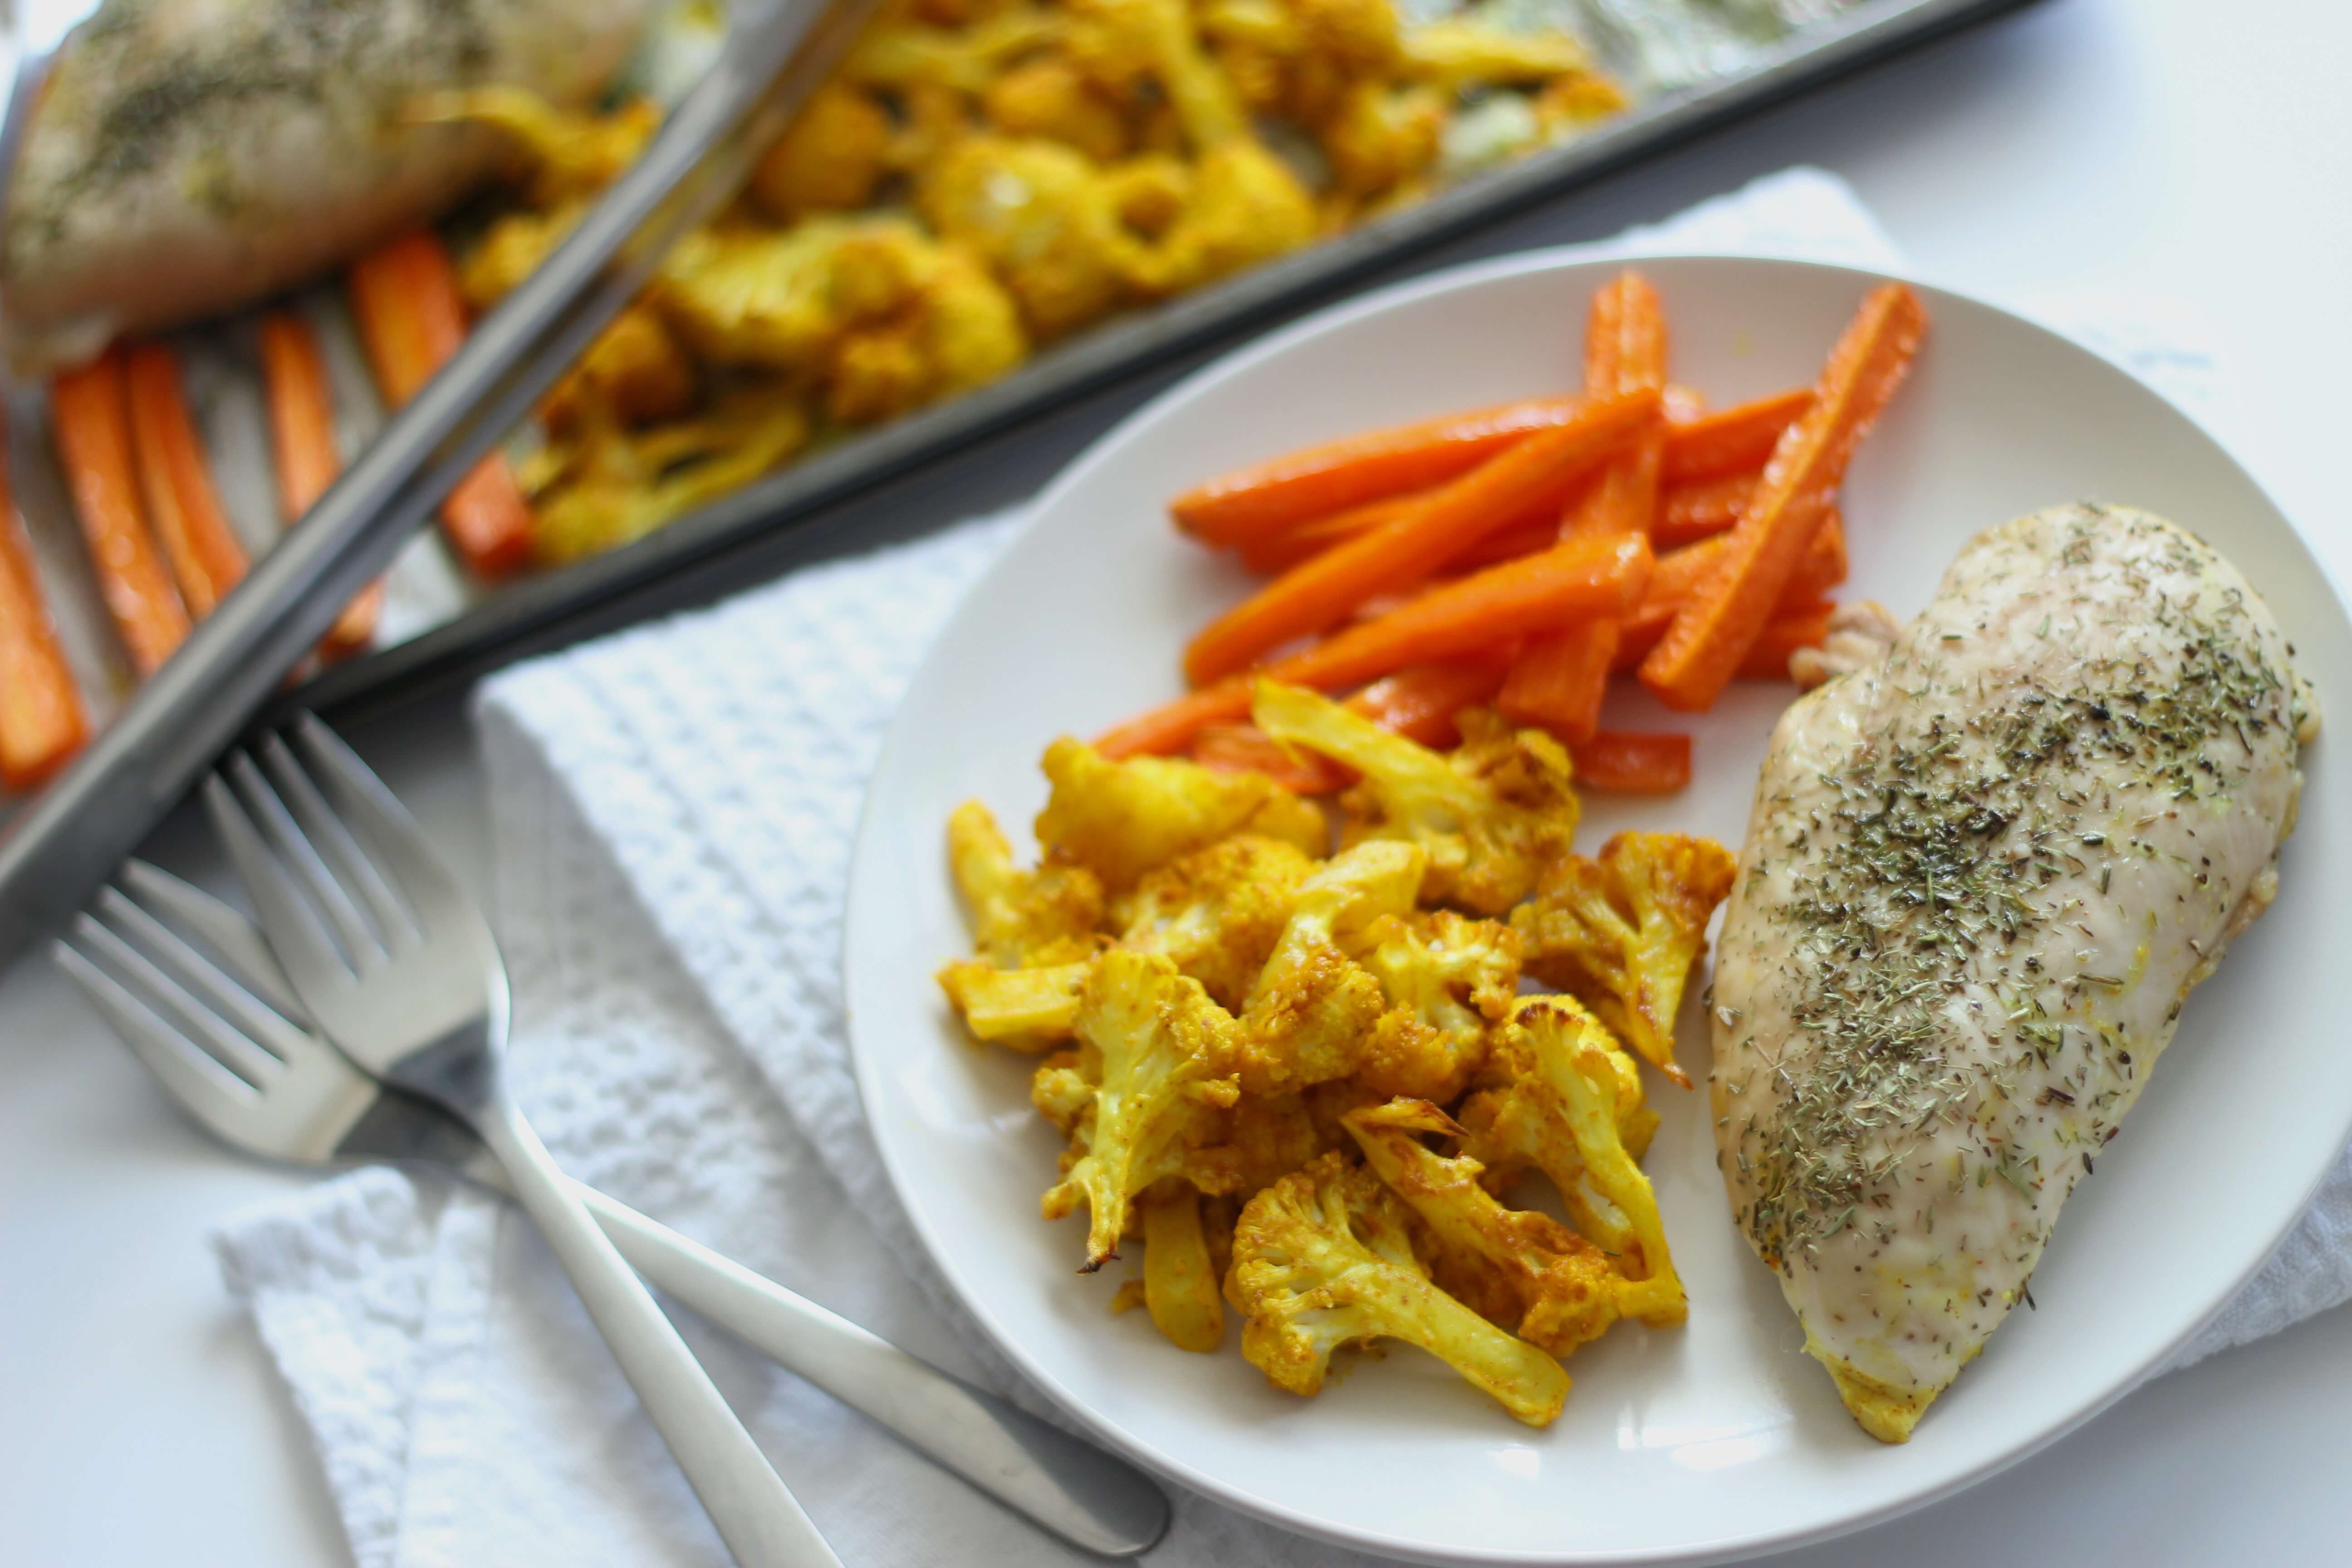 20 Family-Friendly Meals Your Clients Will Love: One Pan Chicken, Golden Cauliflower & Carrot Fries